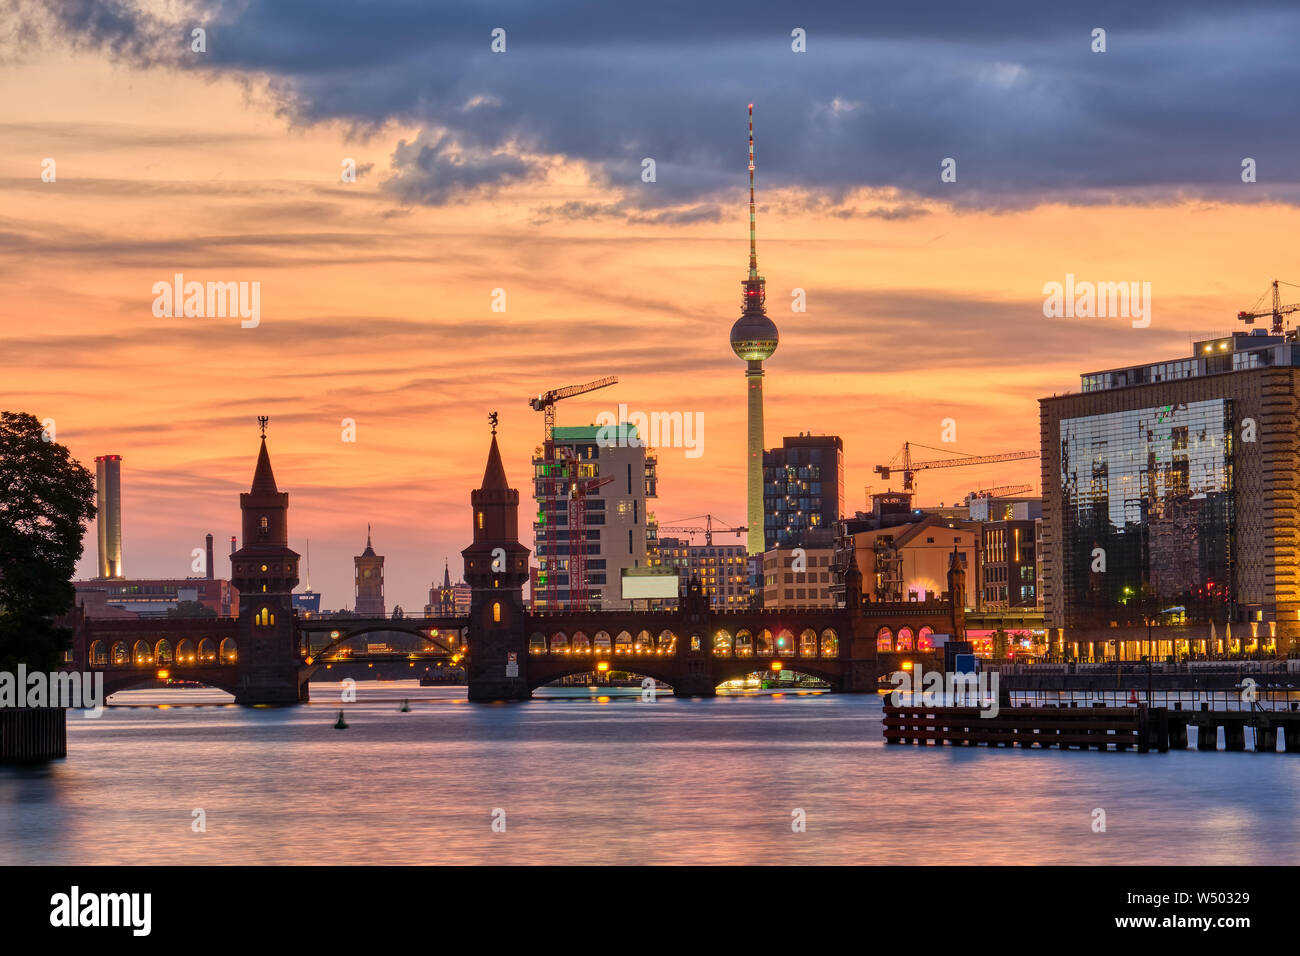 Beautiful sunset at the Oberbaum Bridge and the famous Television Tower in Berlin Stock Photo